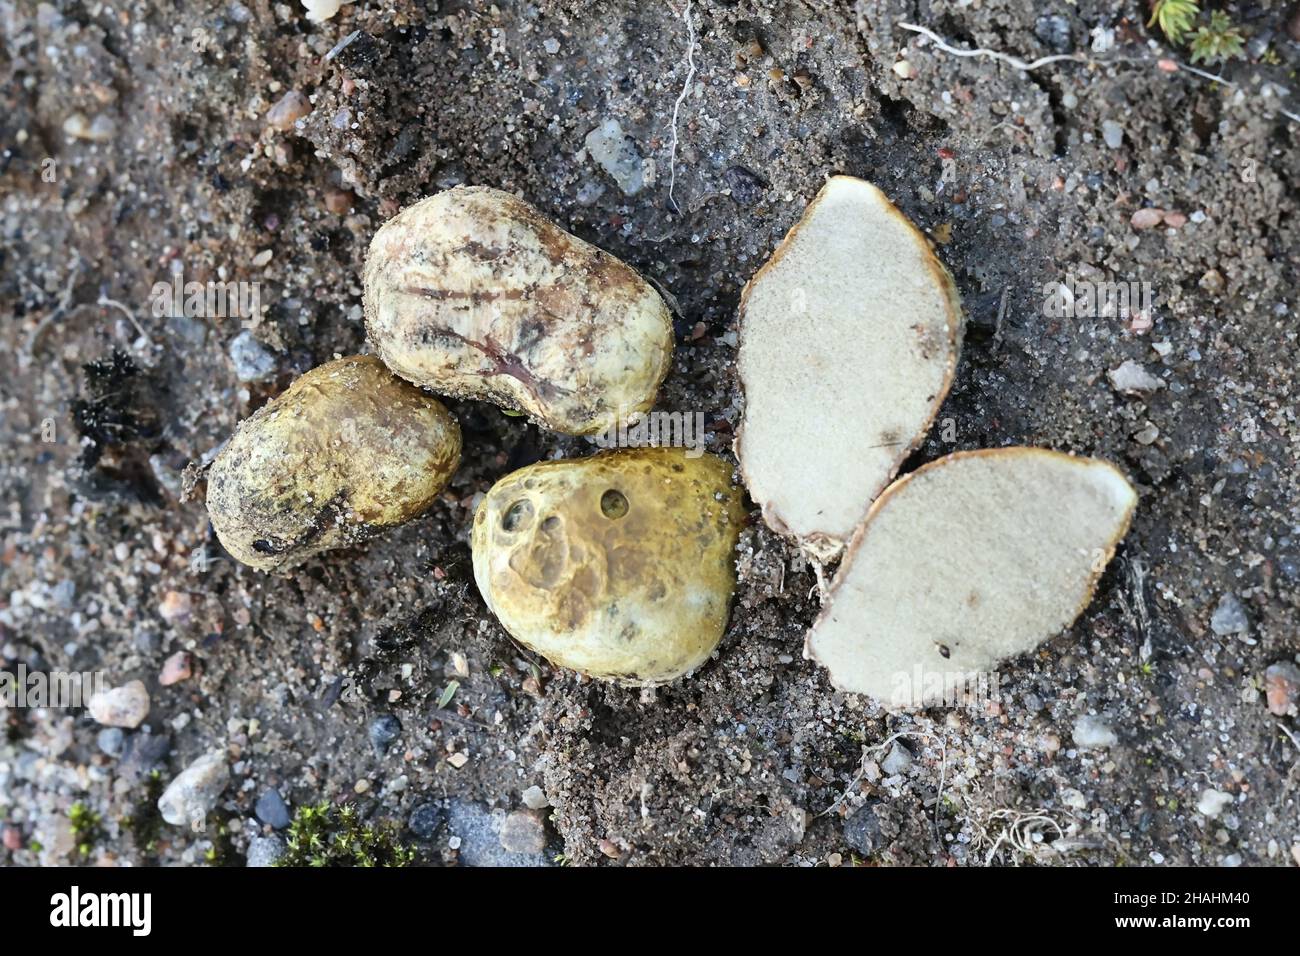 Rhizopogon luteolus, also called Rhizopogon obtextus, commonly known as yellow false truffle, wild fungus from Finland Stock Photo